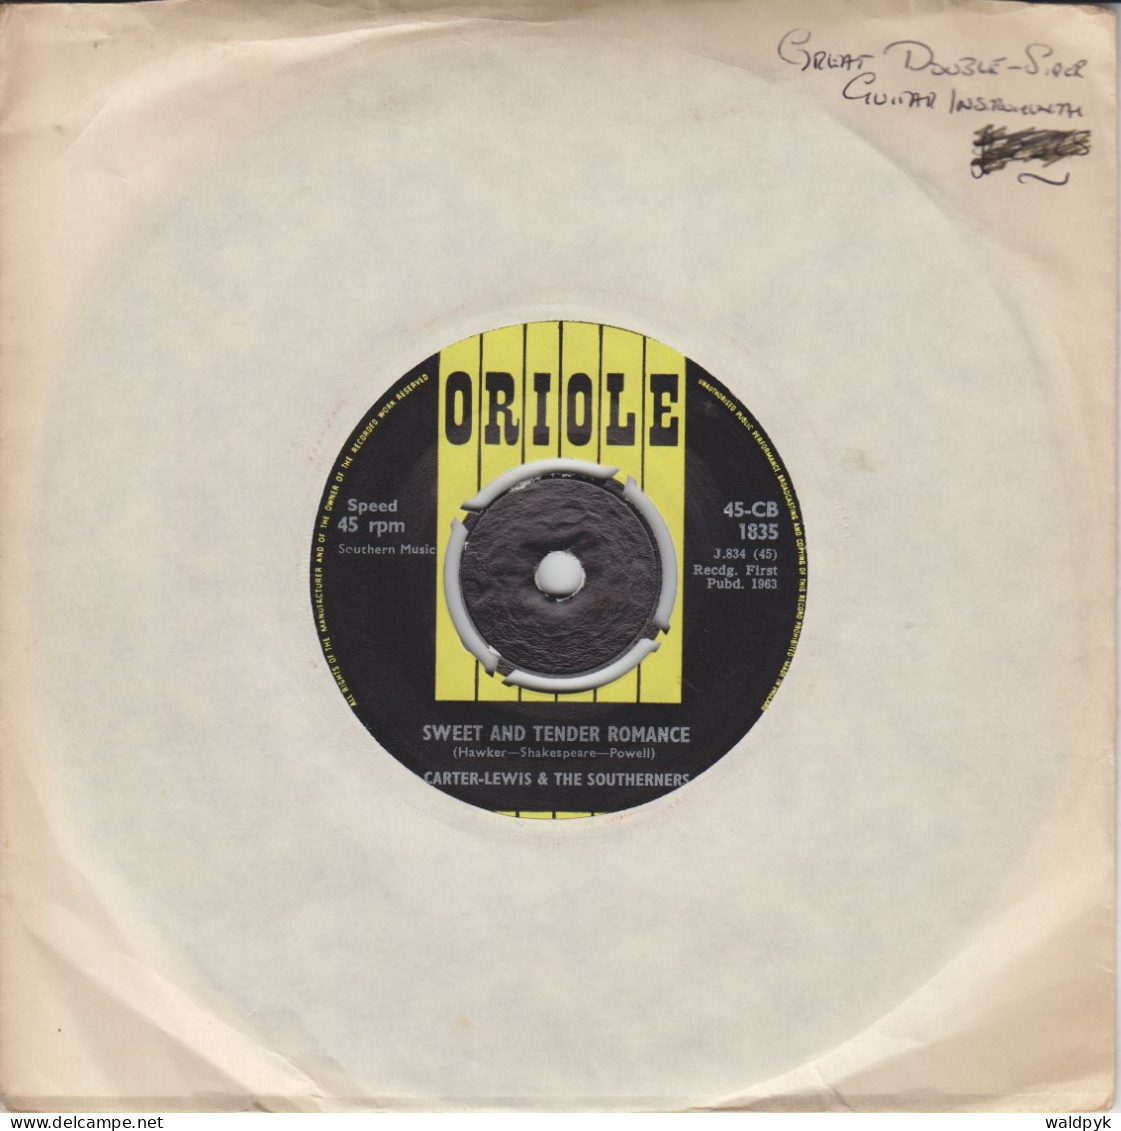 CARTER-LEWIS & THE SOUTHERNERS - Sweet And Tender Romance - Other - English Music